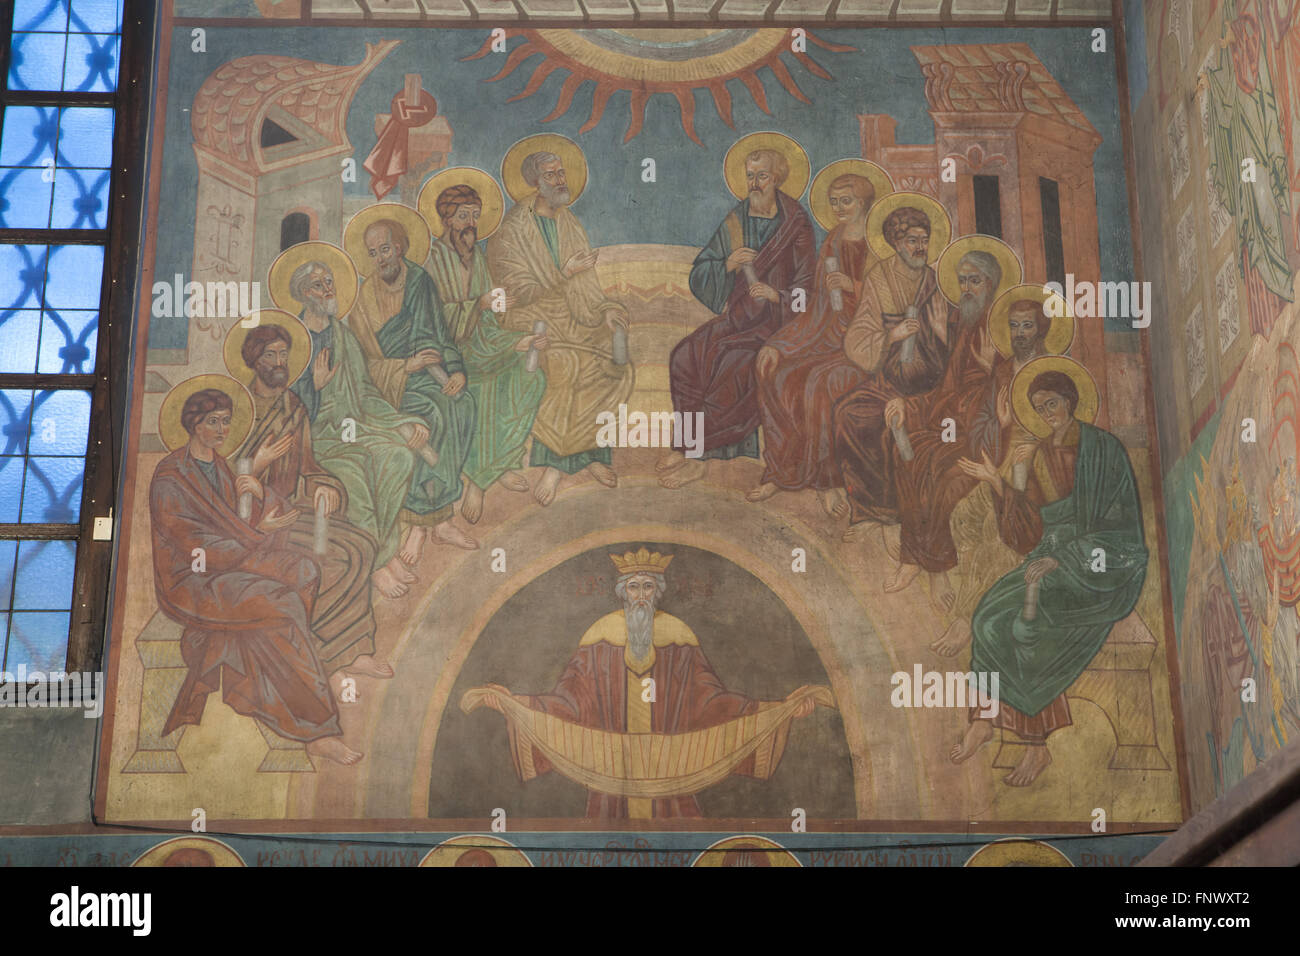 Descent of the Holy Spirit on the Apostles. Mural painting by Russian icon painters Rostislav Koryakin (1918-1999) and Andrei Ryazanov (1885-1950) in the Dormition Church at the Olsany Cemetery in Prague, Czech Republic. An allegorical figure at the bottom called Kosmos symbolizes the world. The Dormition Church designed by Russian architect Vladimir Brandt (1887-1944) was built in 1924-1925 by the Russian white emigration in Czechoslovakia. Mural paintings were realised in 1941-1945 by group of Russian icon painters after design by famous Russian book illustrator Ivan Bilibin (1876-1942) from Stock Photo